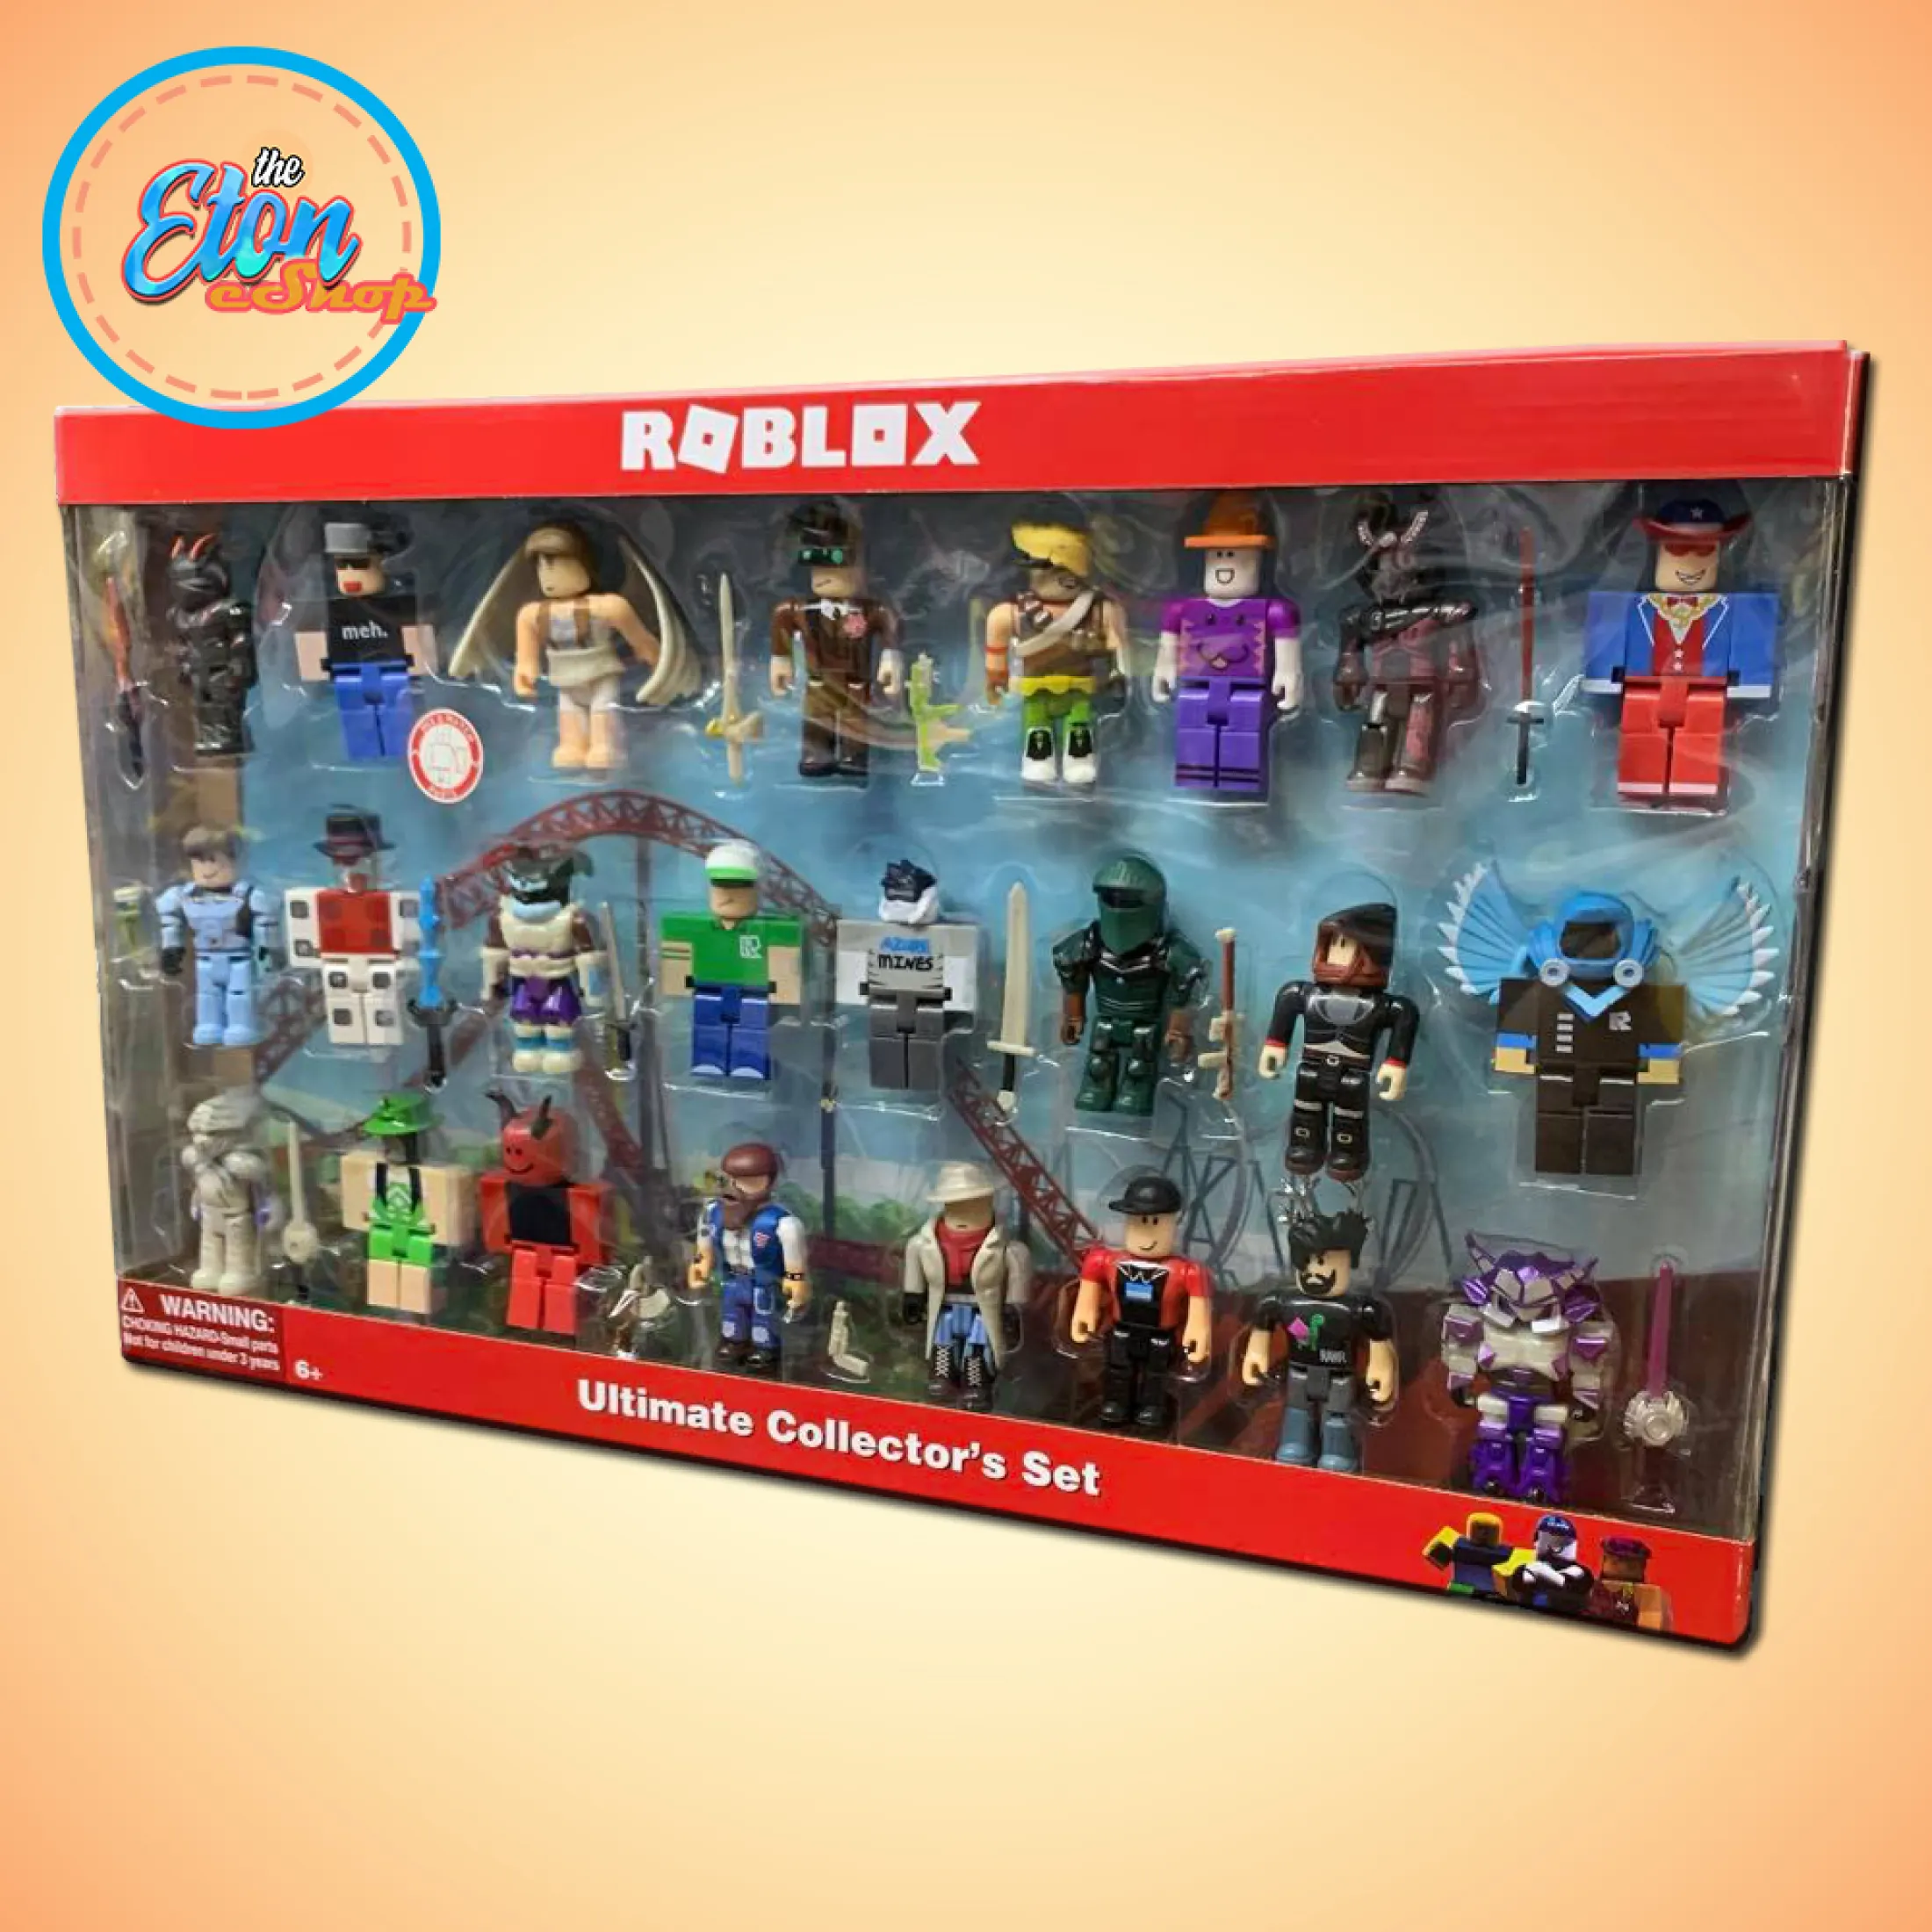 Eton Shop 24 In 1 Ro Blox Limited Edition Toy Collection Set Lazada Ph - roblox limited edition toy